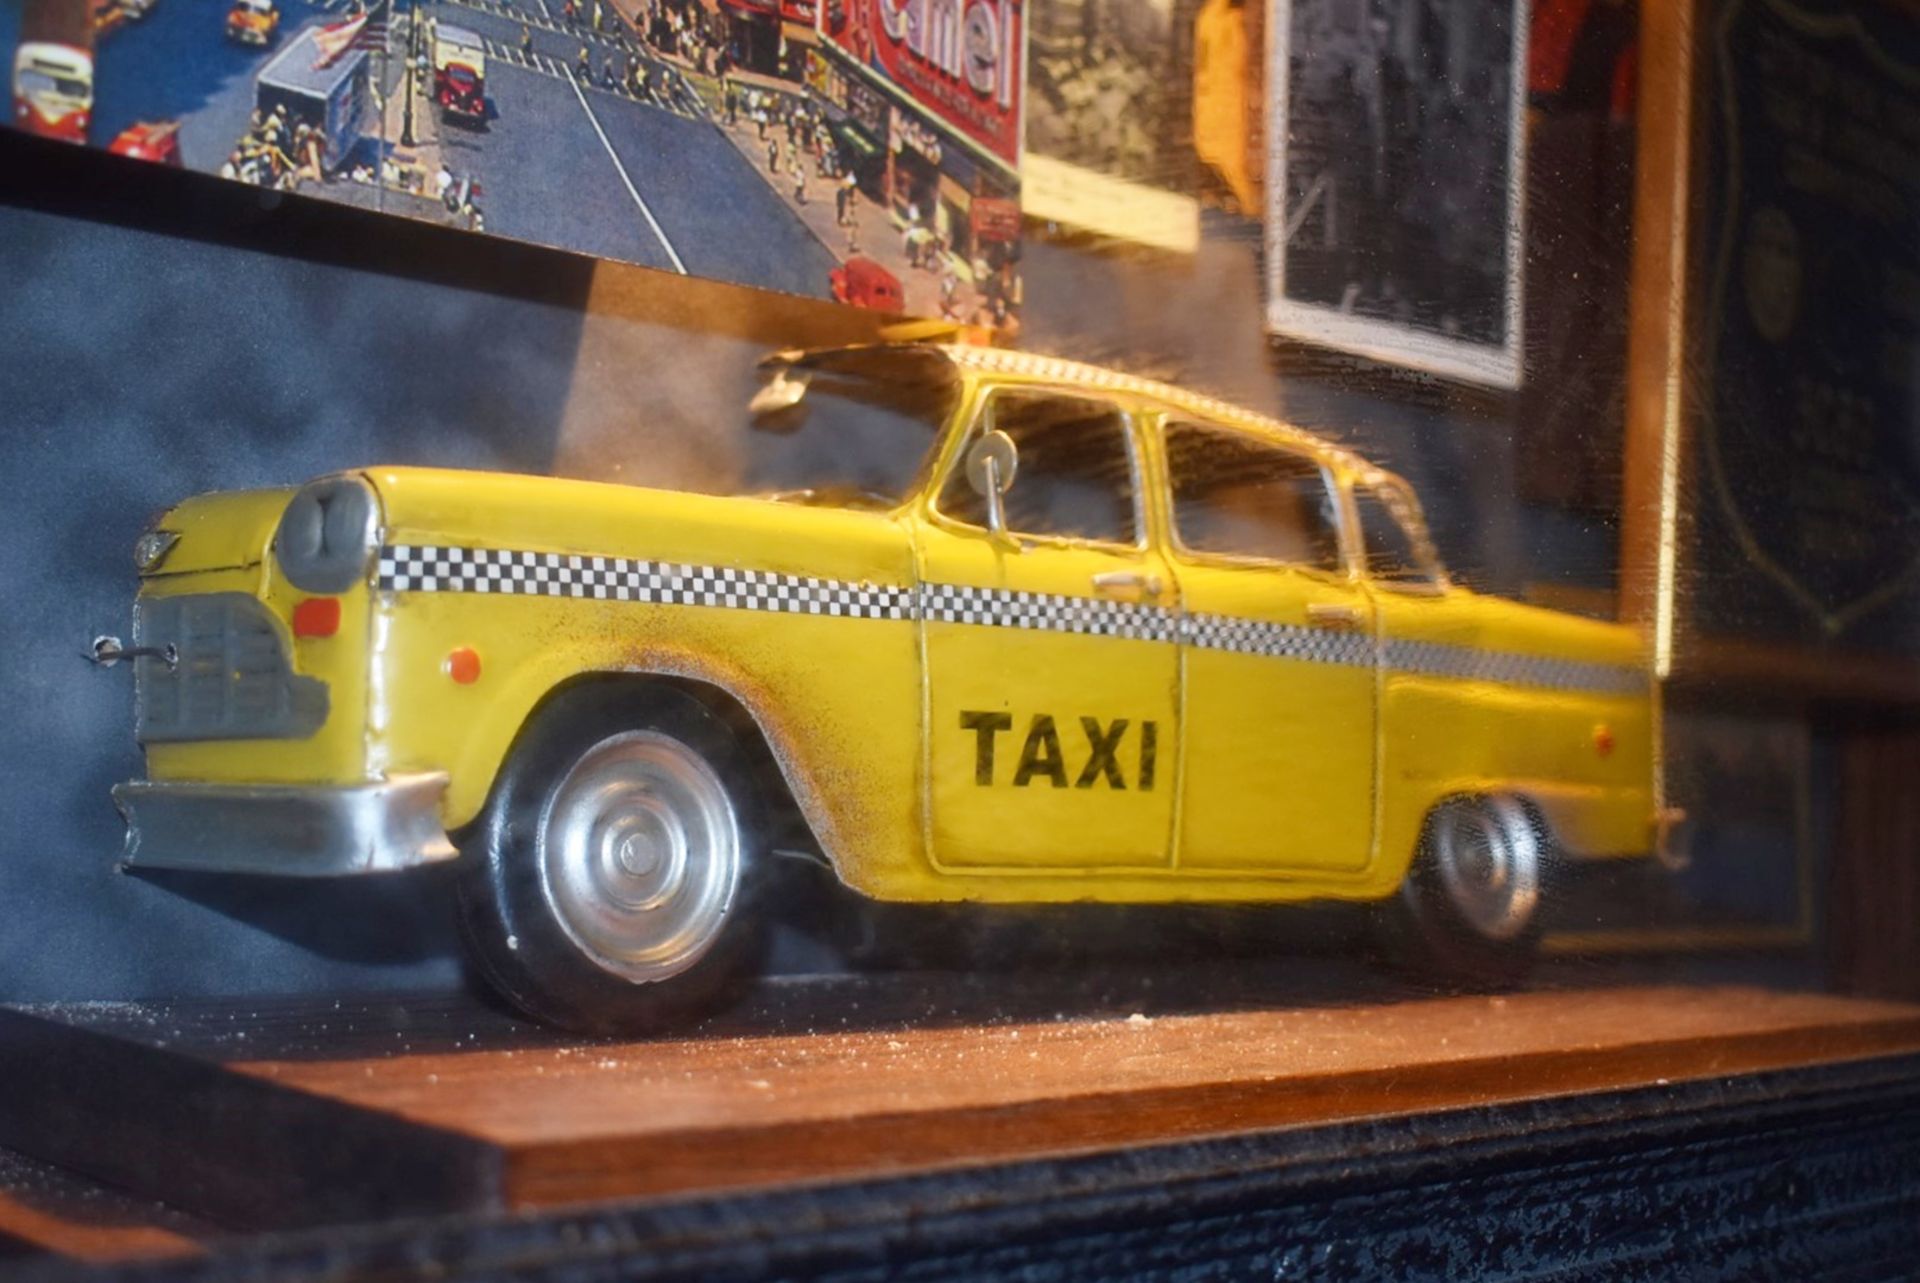 1 x Americana Wall Mounted Illuminated Display Case - NEW YORK TAXI - American Themed Showcase - Image 6 of 9